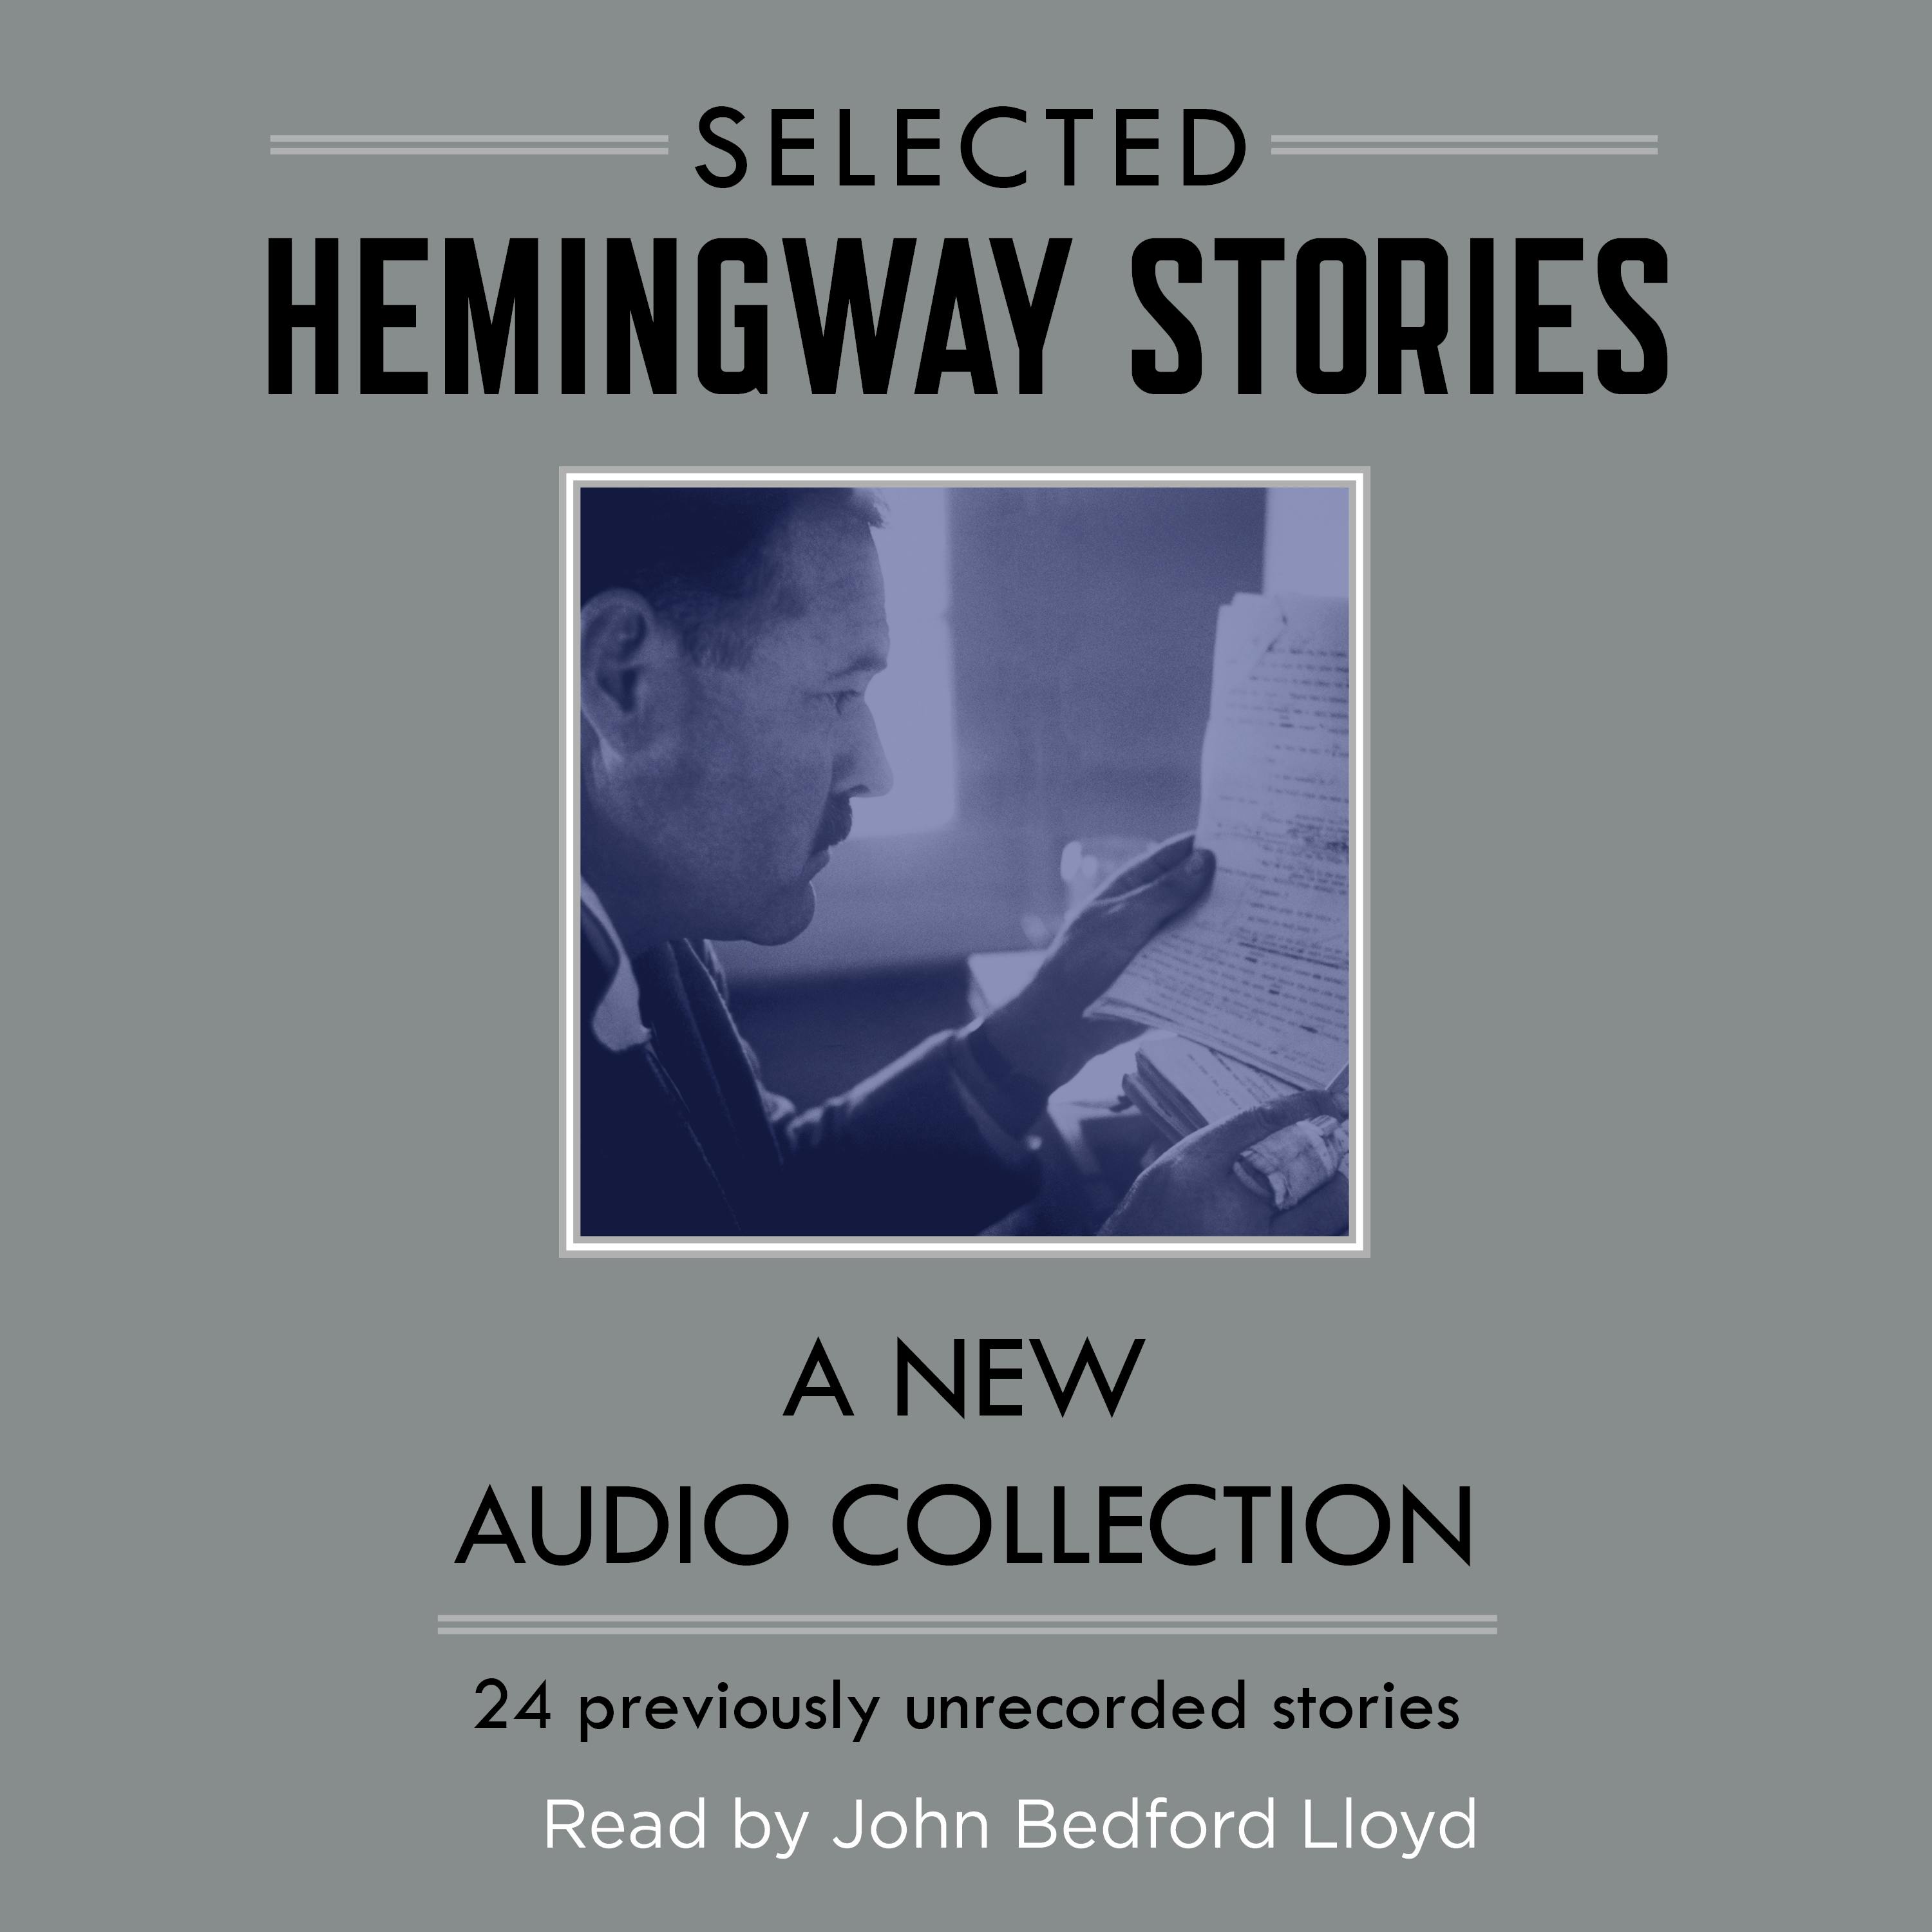 Selected Hemingway Stories: A New Audio Collection - Ernest Hemingway